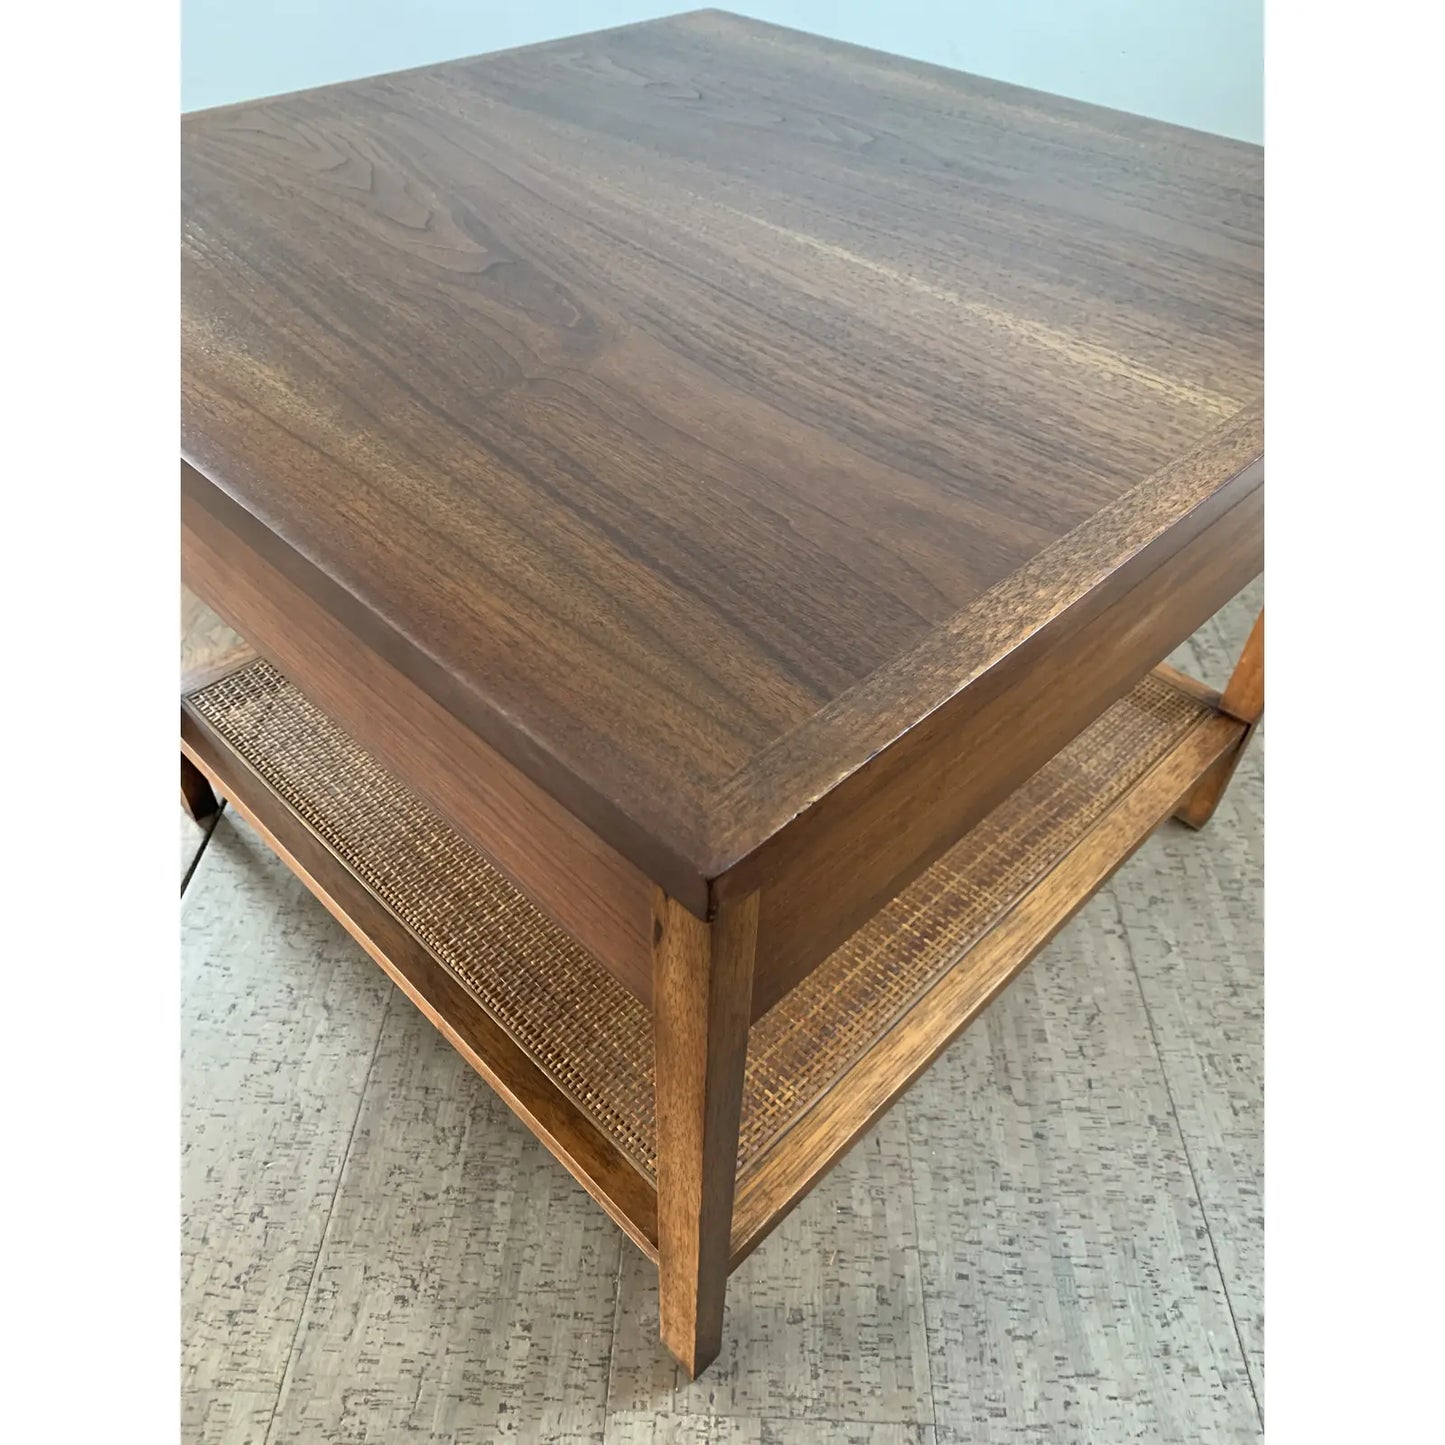 Mid 20th Century Walnut Side Table With Woven Cane Shelf